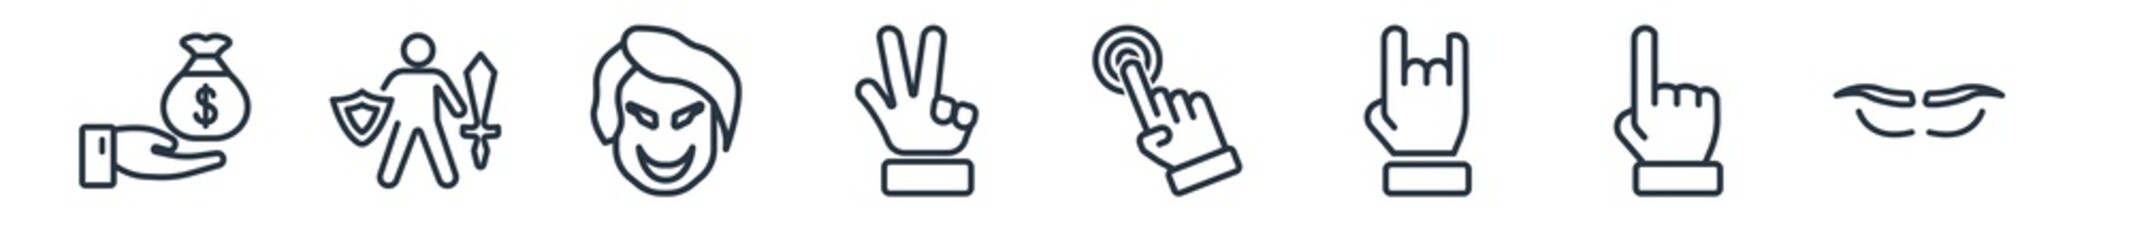 linear set of gestures outline icons. line vector icons such as money bag of dollars, warrior with sword and shield, joker face, hand gesture, pressing, brow vector illustration.